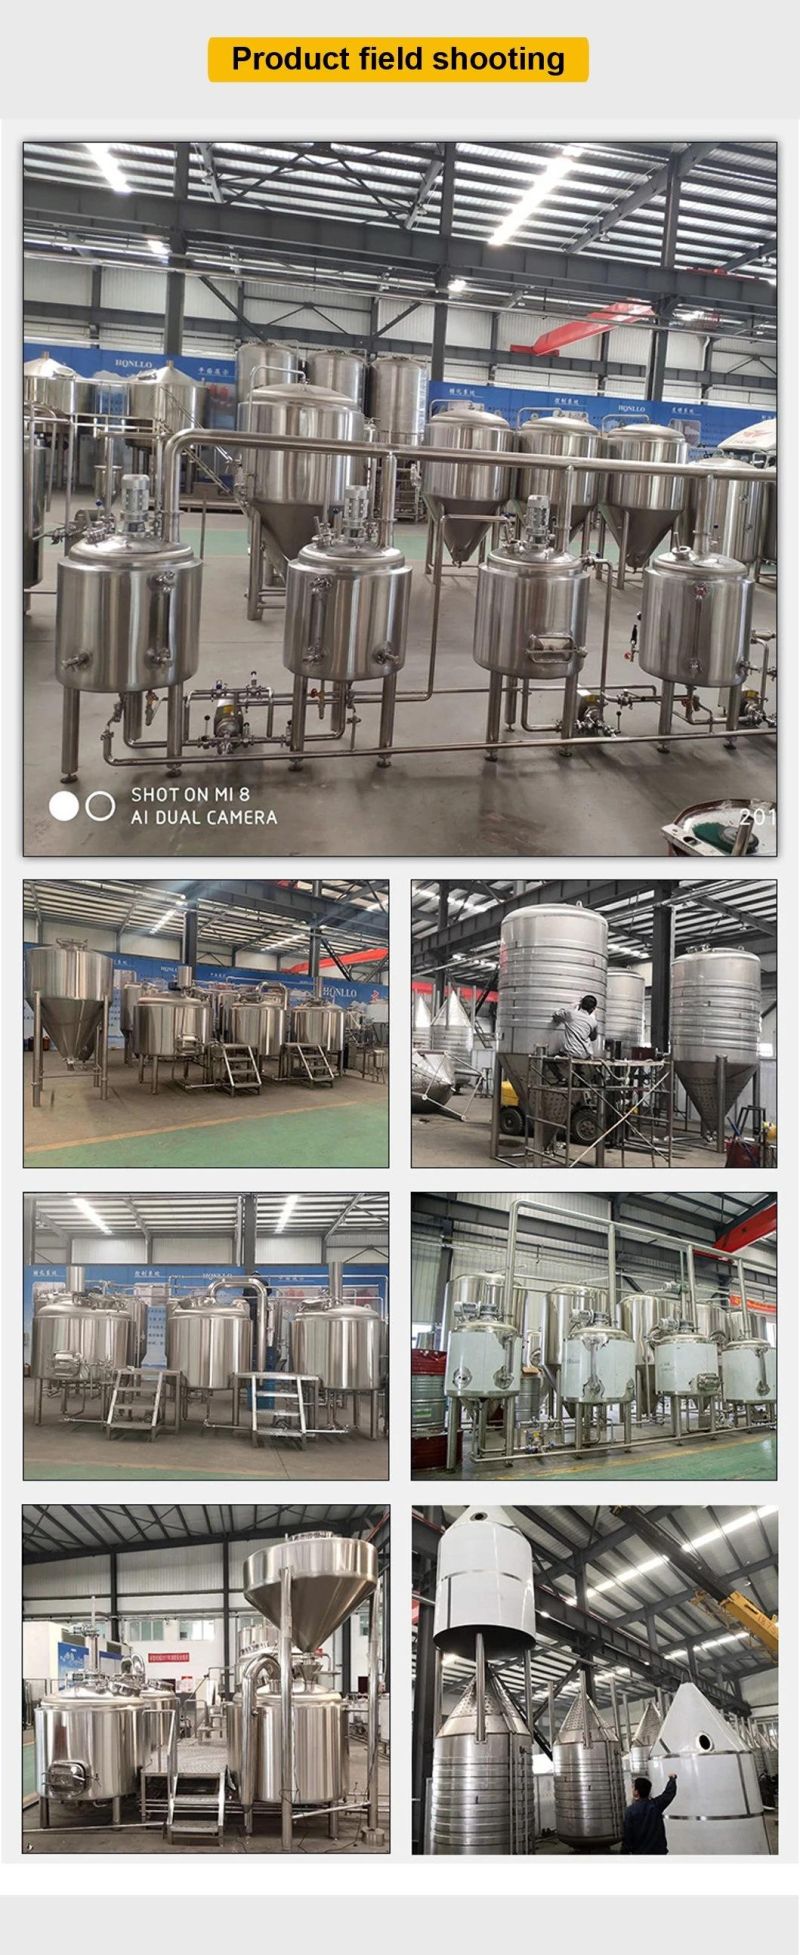 200L 300L 500L 3bbl 5bbl Beer Brewing Equipment with Dimple Jacket